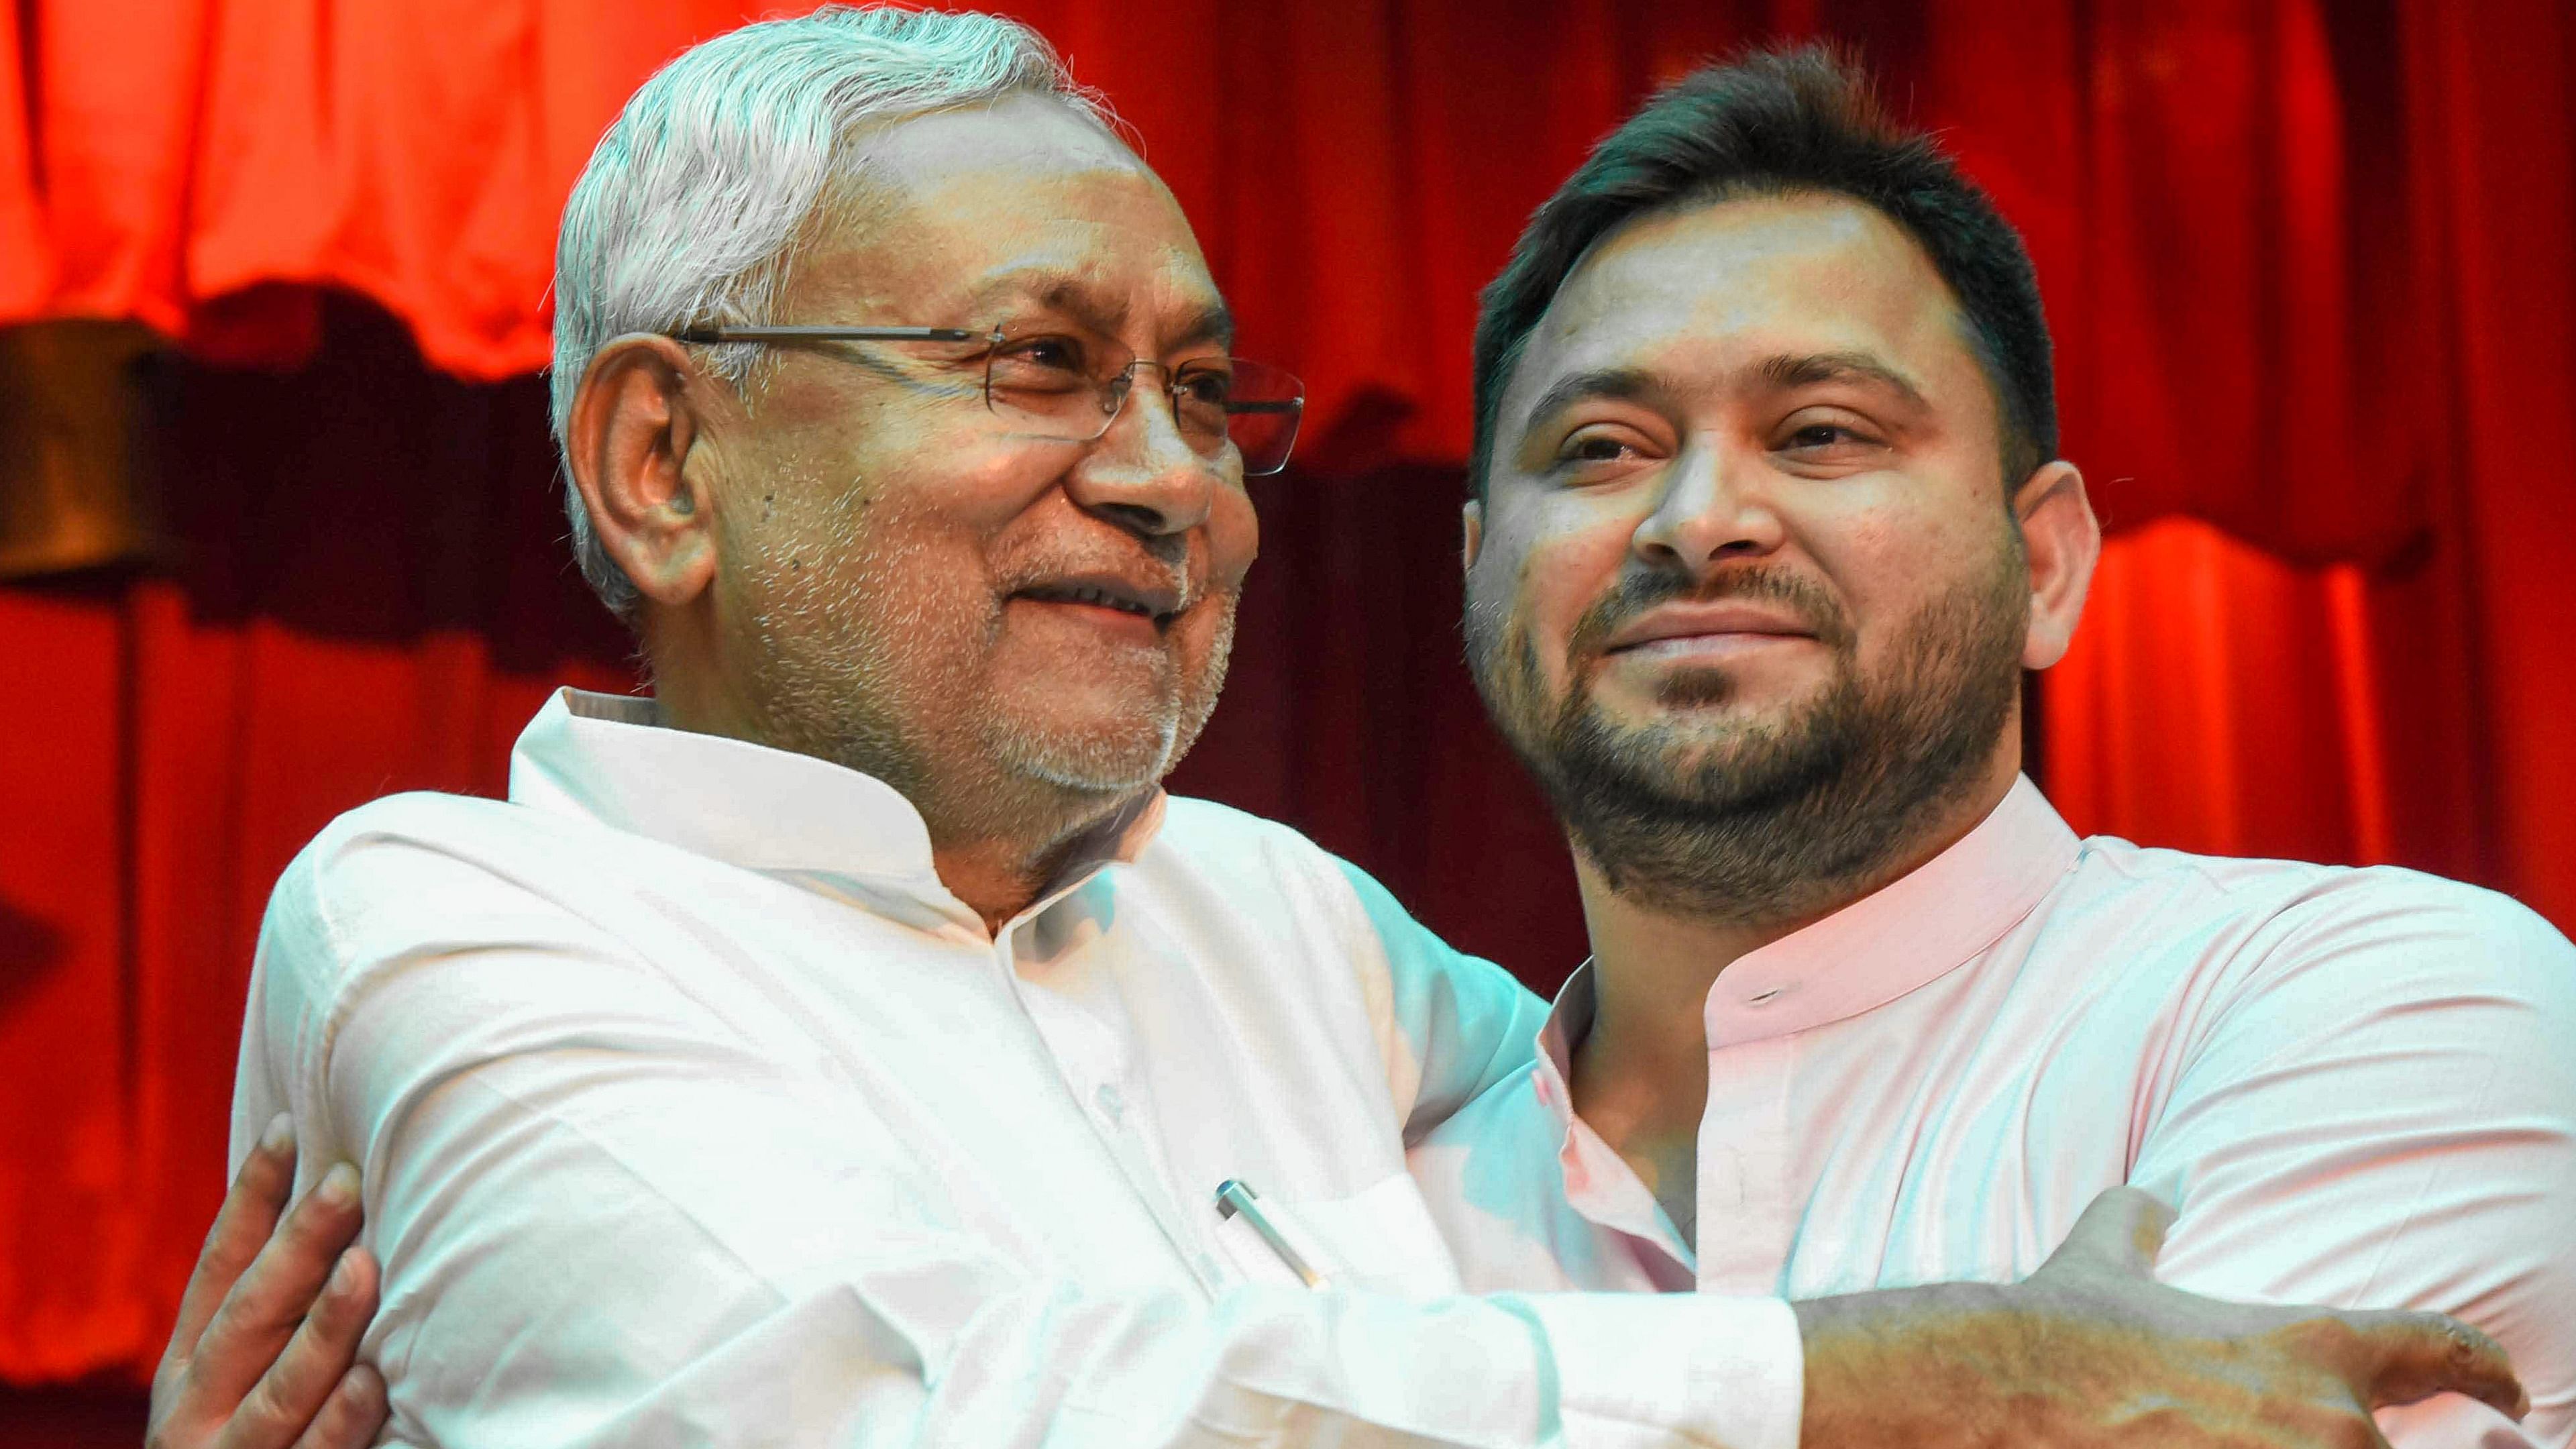 The 'Mahagathbandhan', which comprises the chief minister's JD(U), besides RJD, Congress, CPI(ML), CPI and CPI(M), has a combined strength of more than 160 in the 243-strong House. Credit: PTI Photo